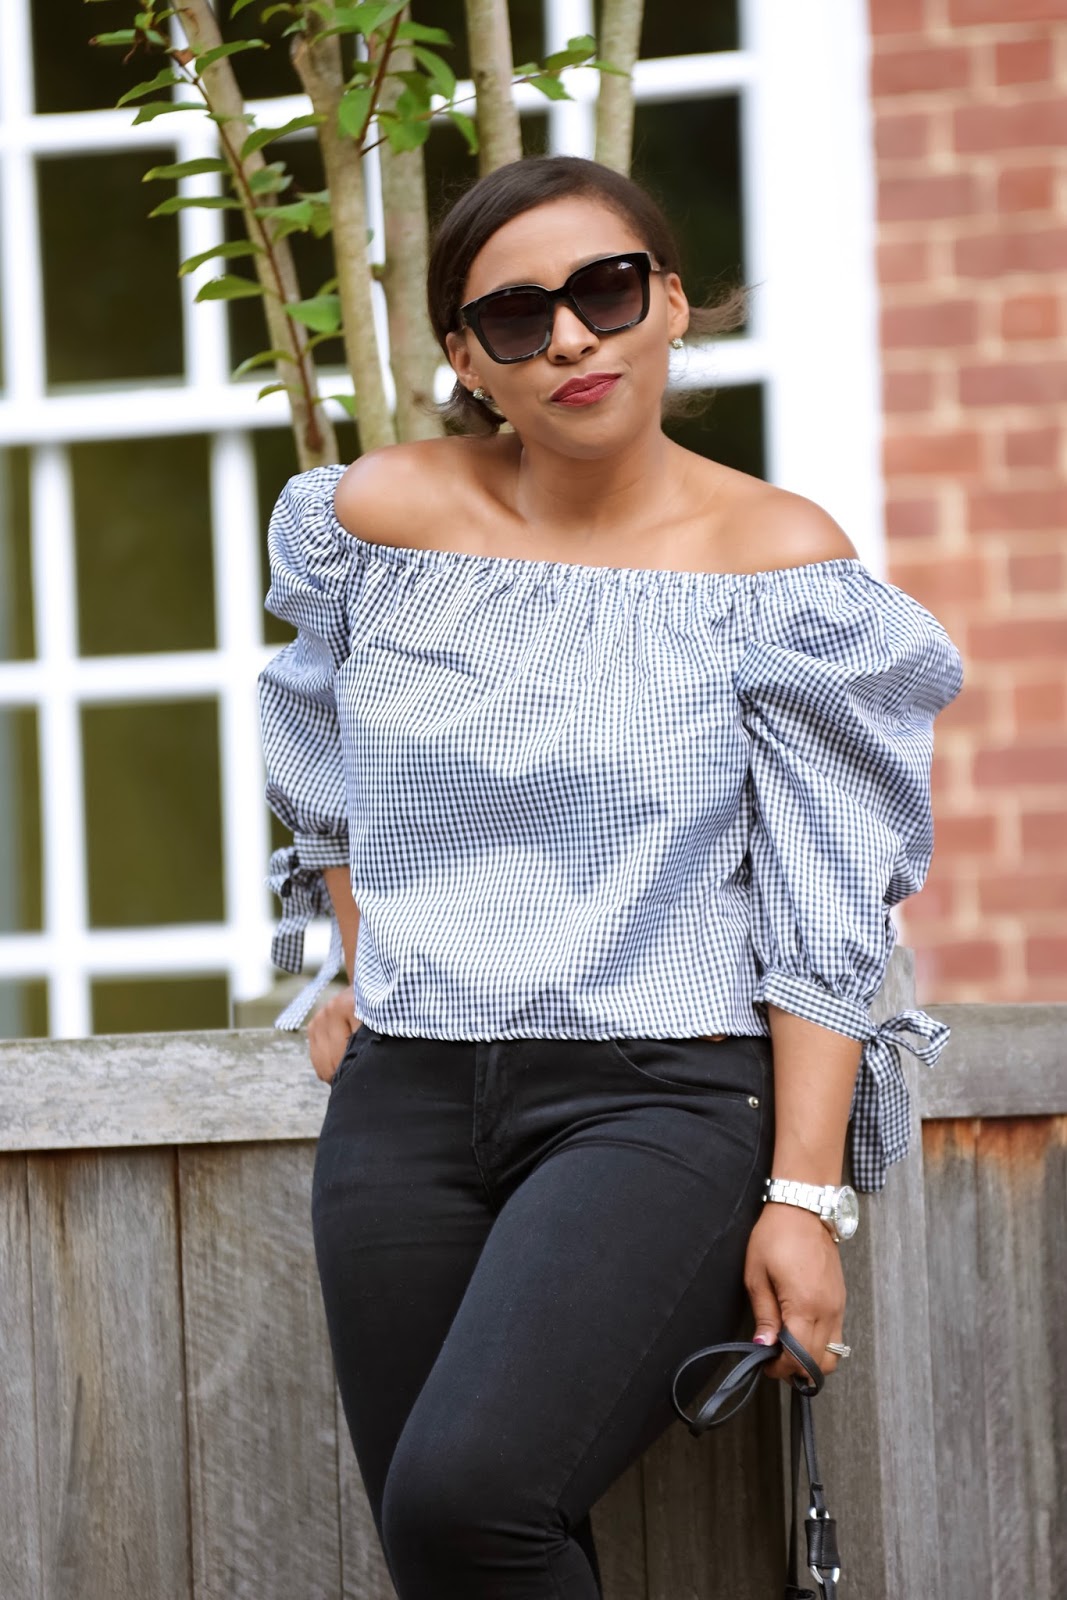 Ruffle top, off the shoulder trend, rainbowbabes, casual look, off the shoulder tops, slip on shoes